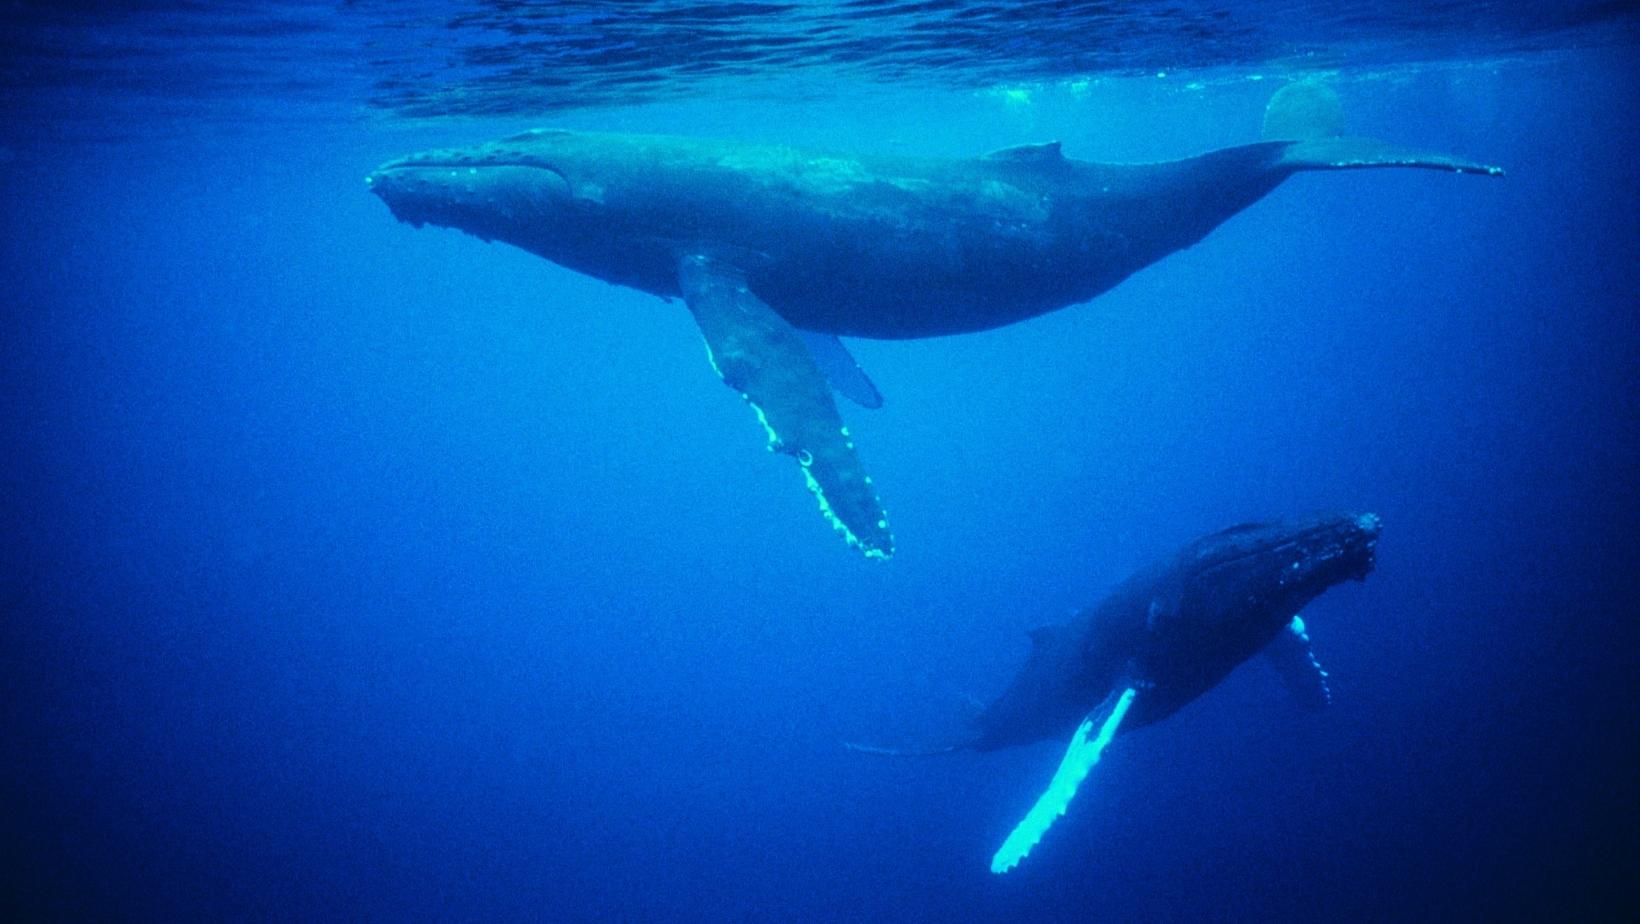 Facts about whales